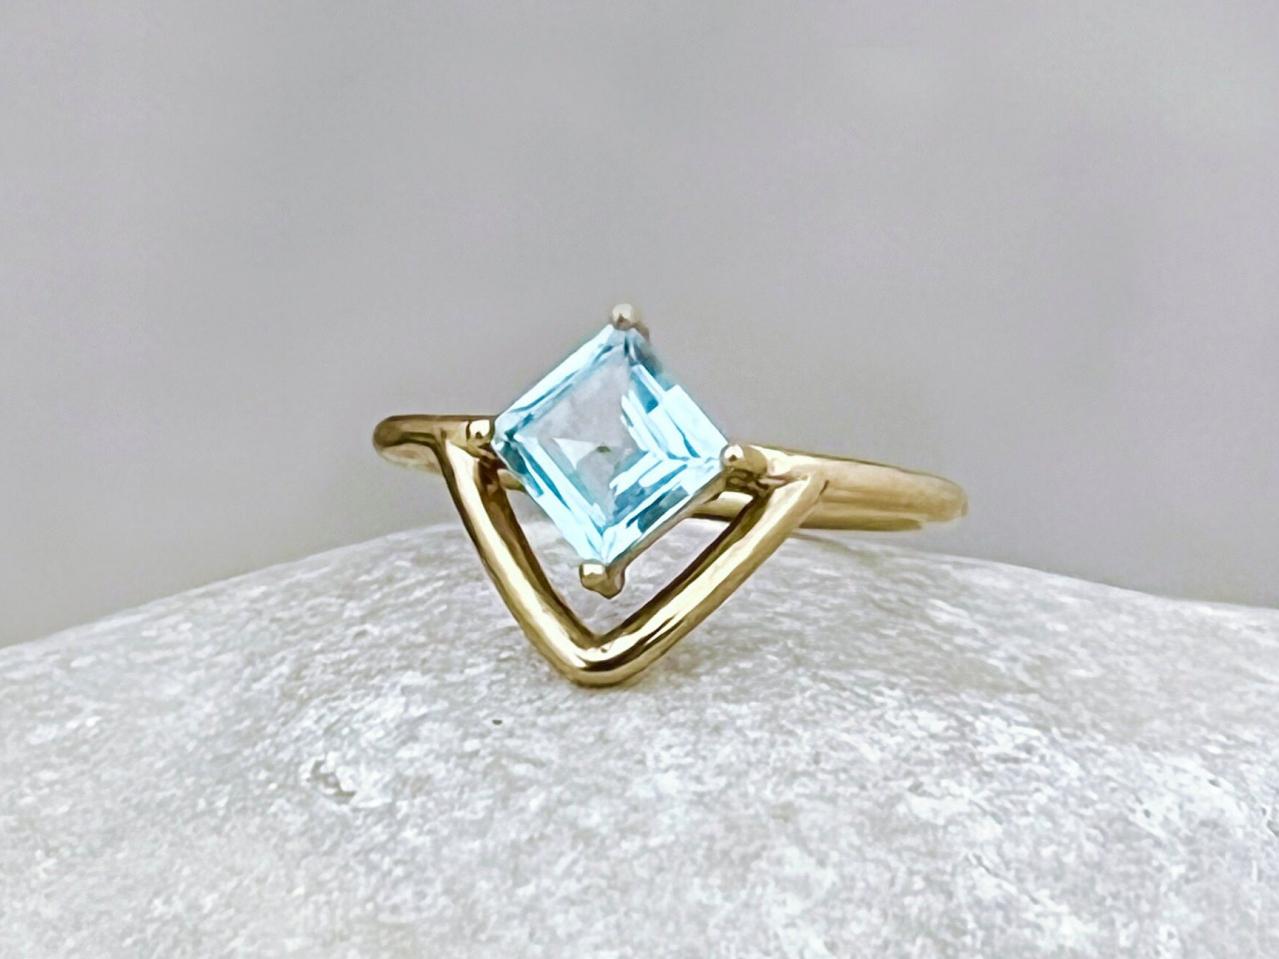 Solid Gold Engagement Ring With Princess Cut Blue Topaz, Solitaire Natural Blue Gemstone Bridal Ring, Gold November Gemstone Ring